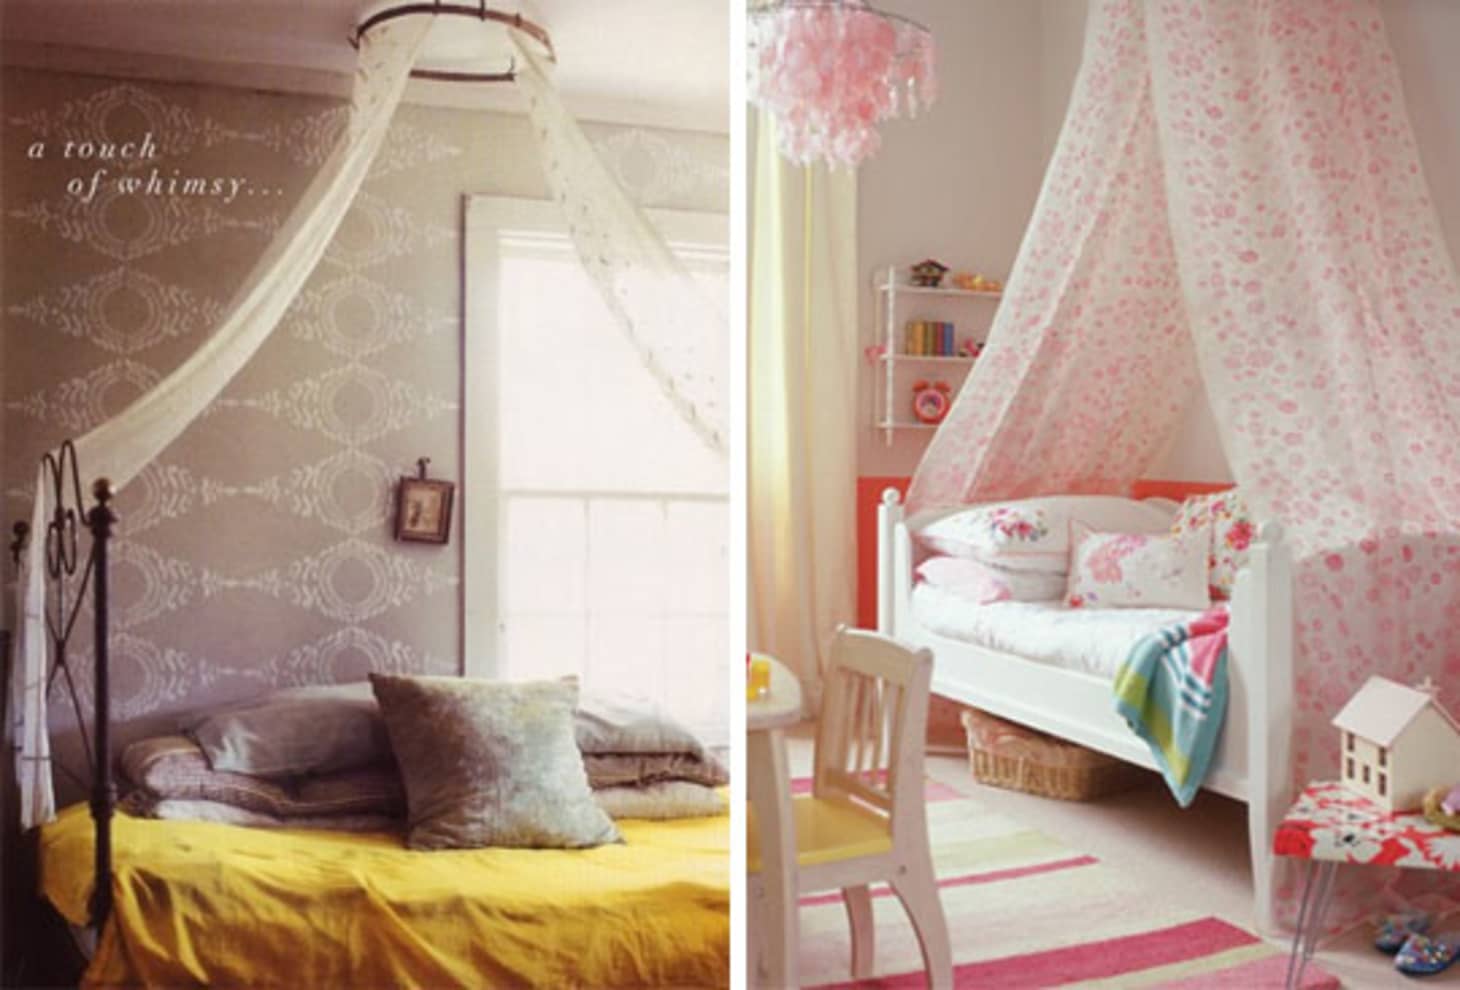 Diy Ideas For Getting The Look Of A Canopy Bed Without